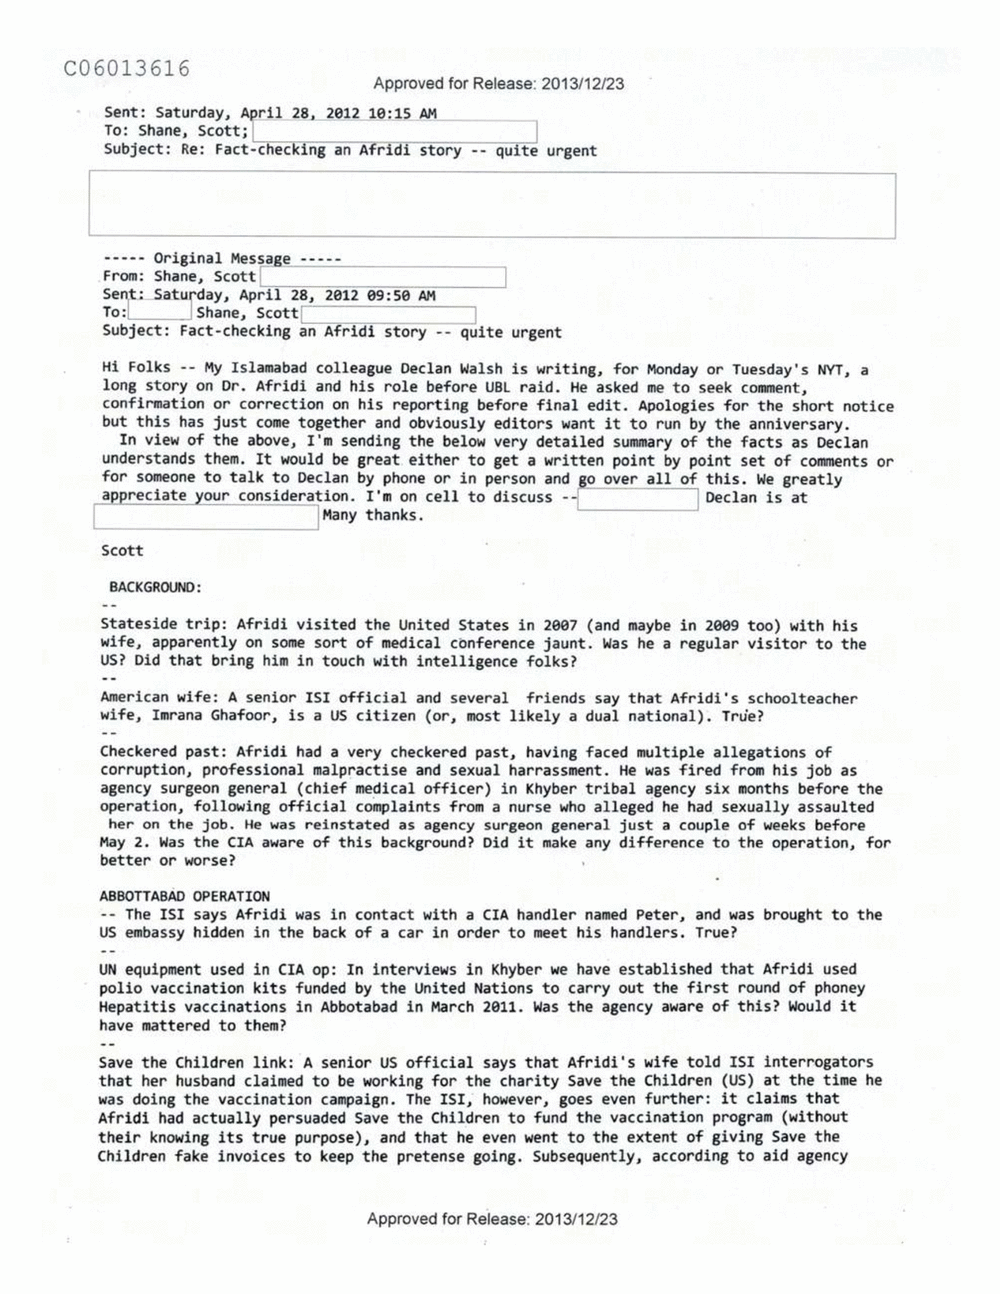 Page 443 from Email Correspondence Between Reporters and CIA Flacks